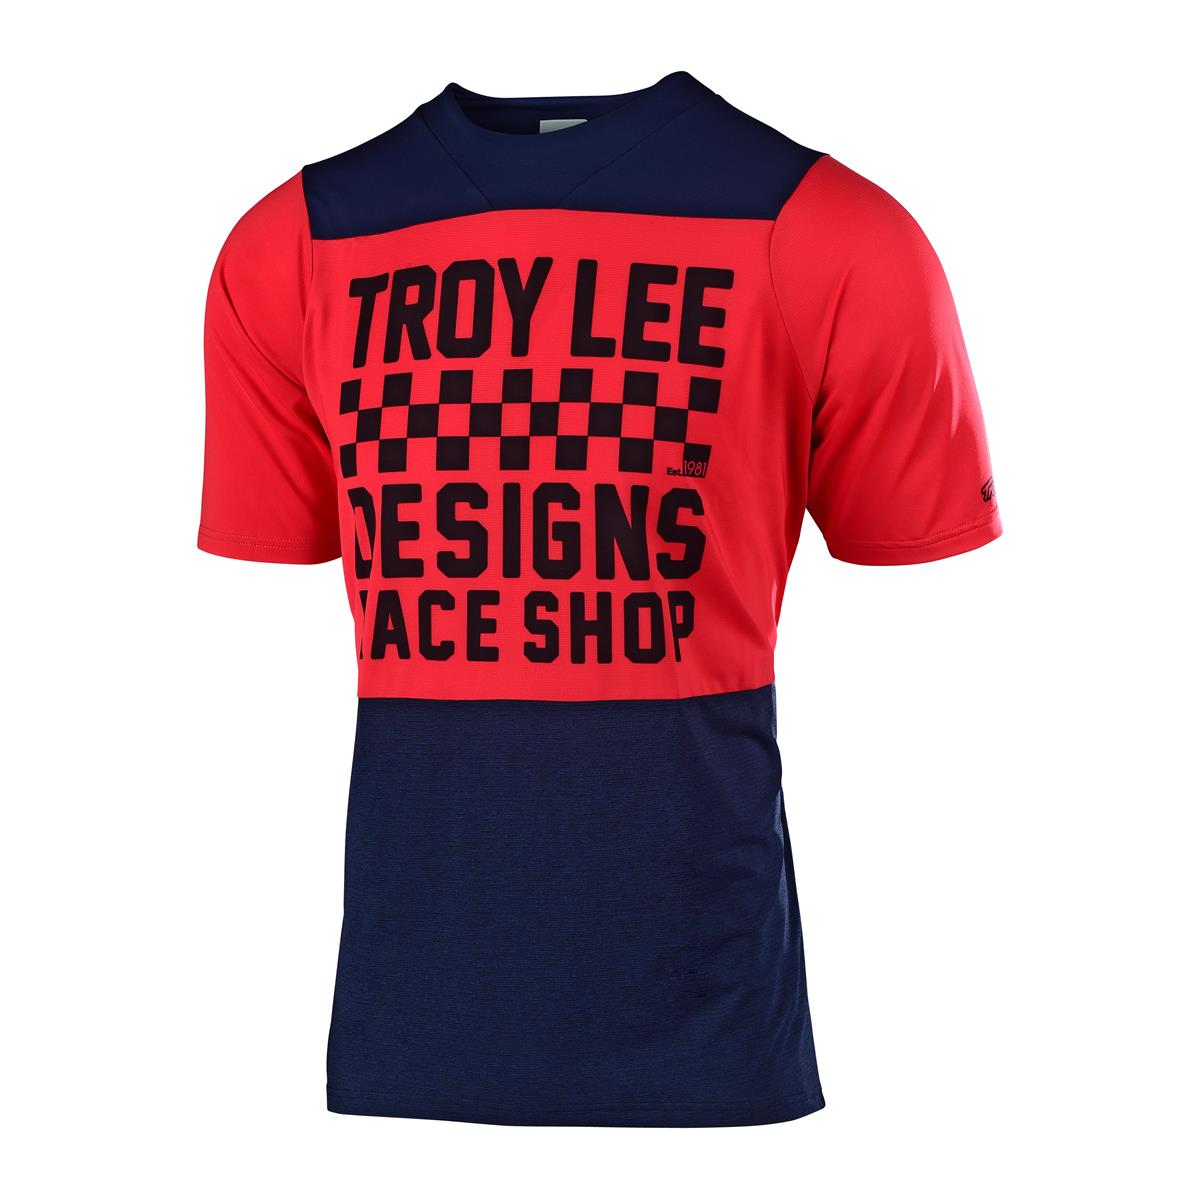 Troy Lee Designs Enfant Maillot VTT Manches Courtes Skyline Checkers - Navy/Rot